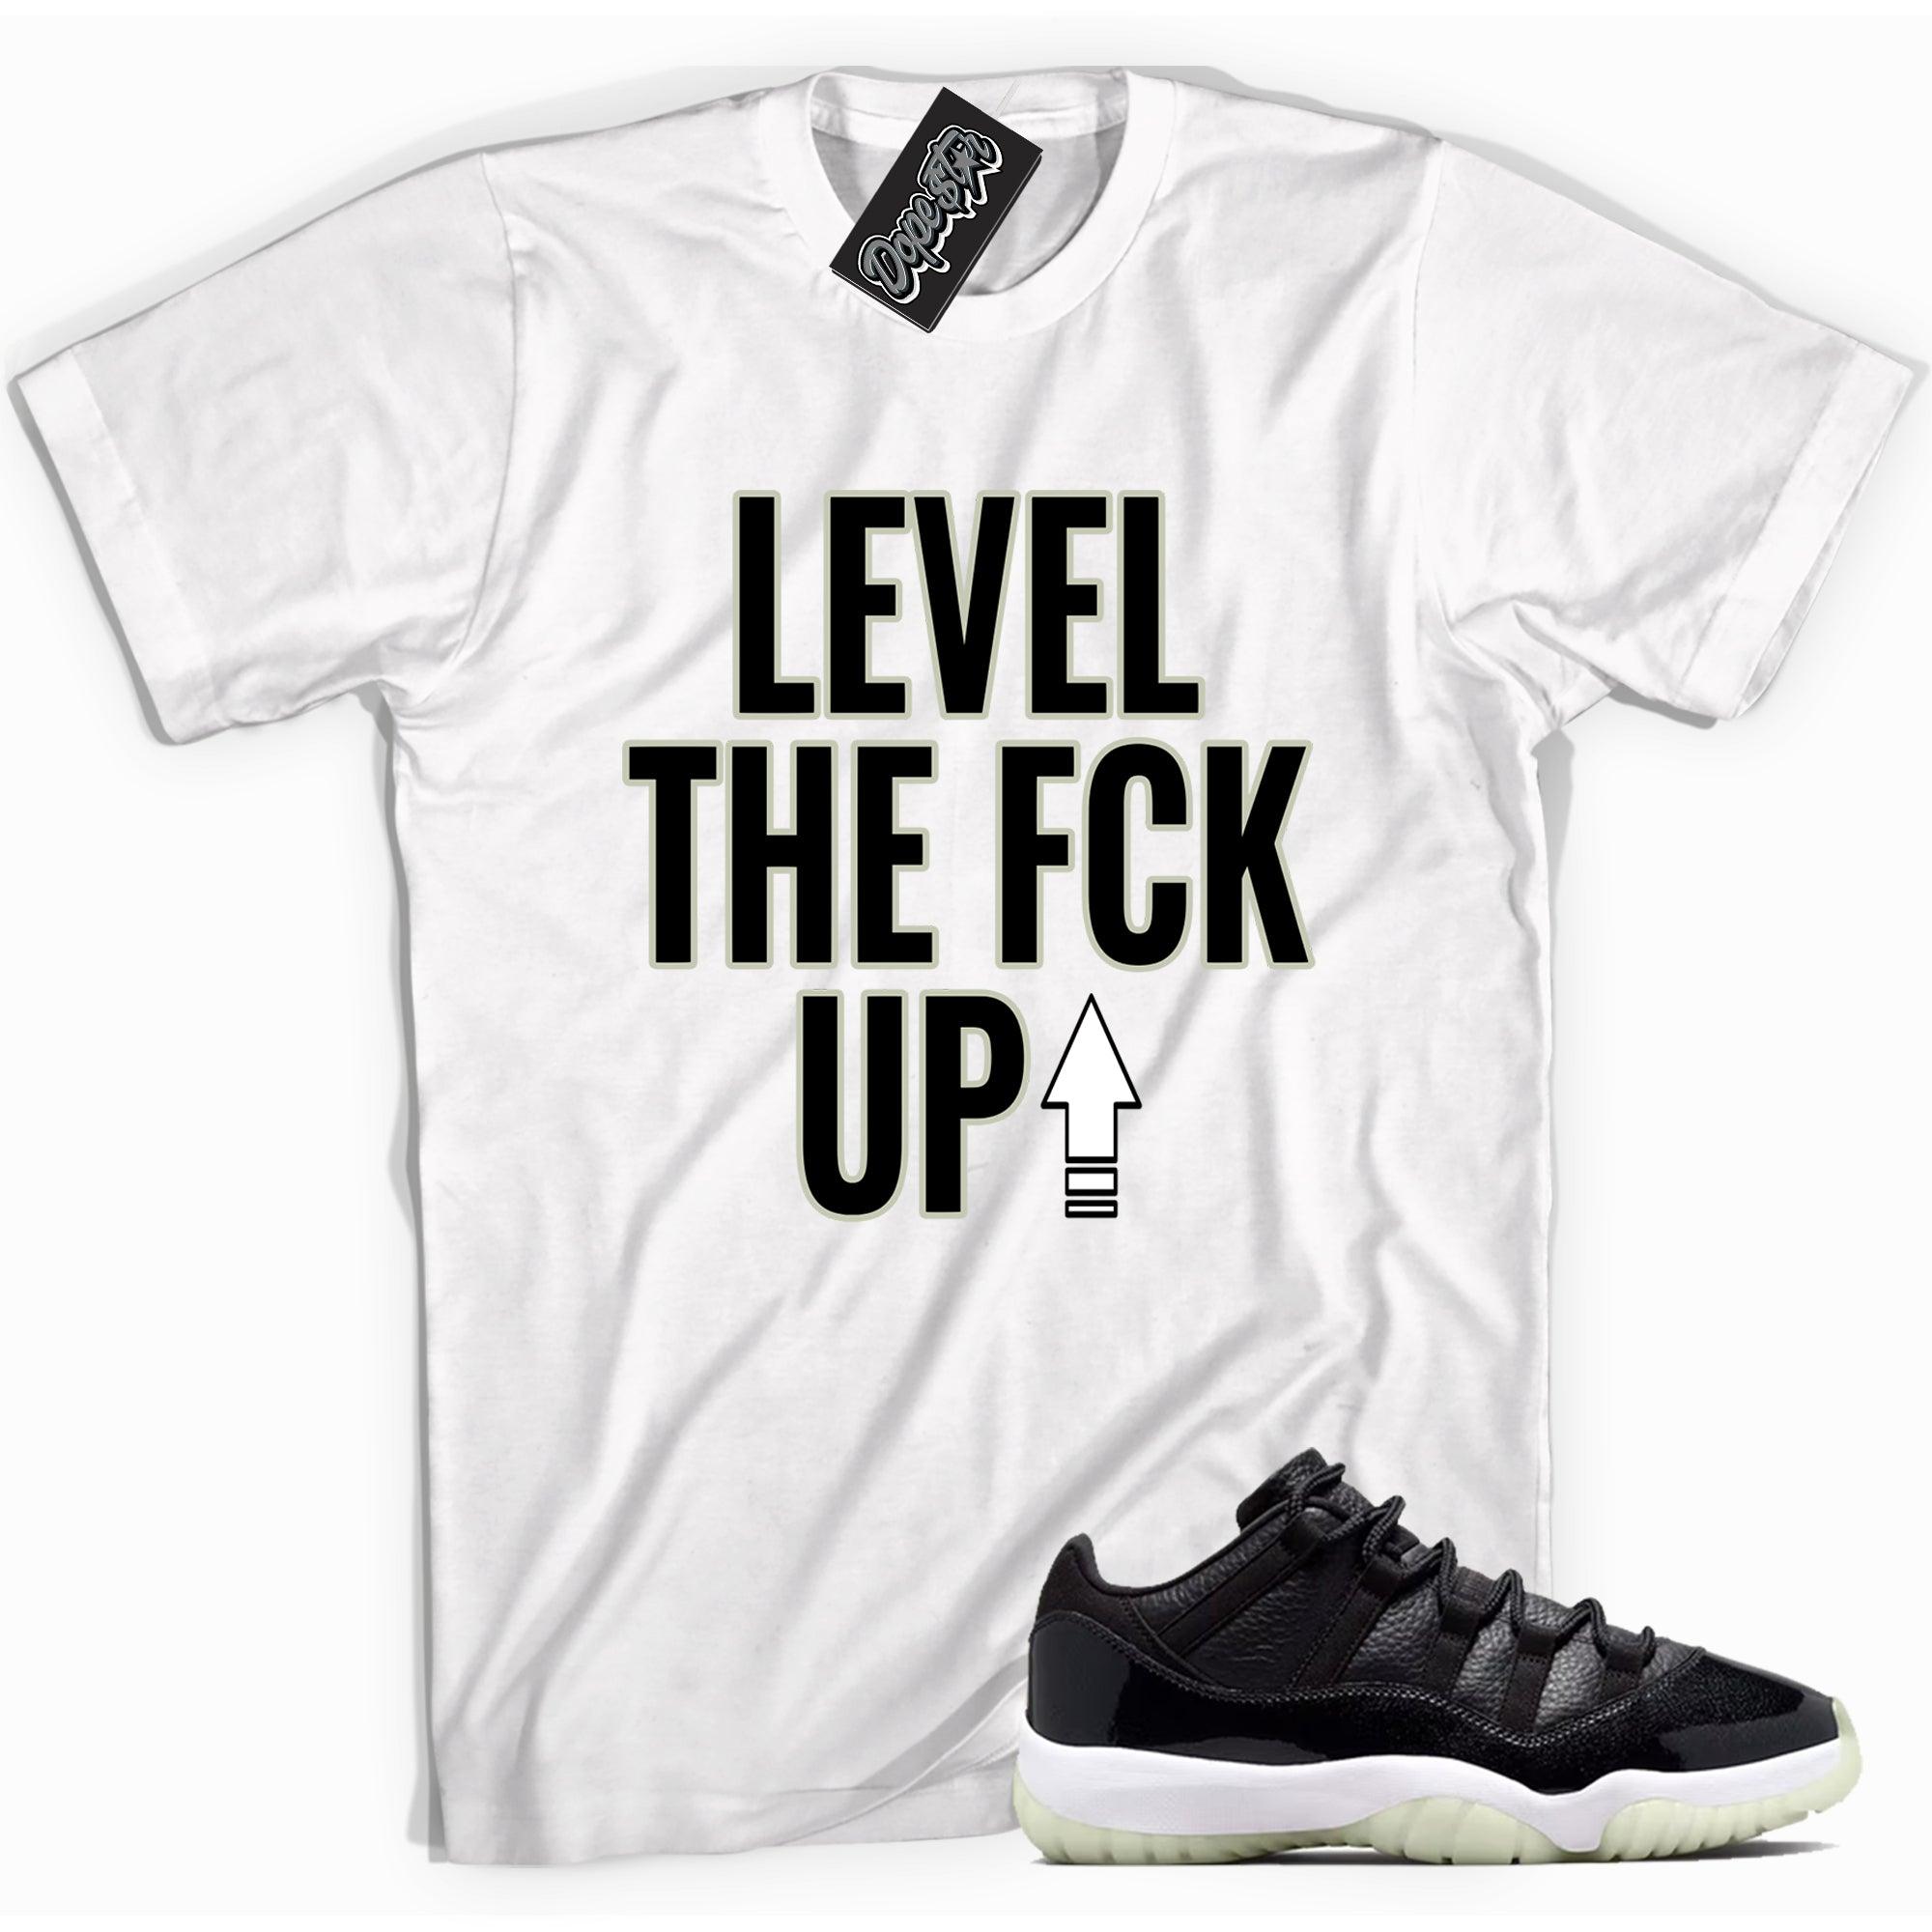 Cool white graphic tee with 'Level Up' print, that perfectly matches Air Jordan 11 Retro Low 72 10 sneakers.